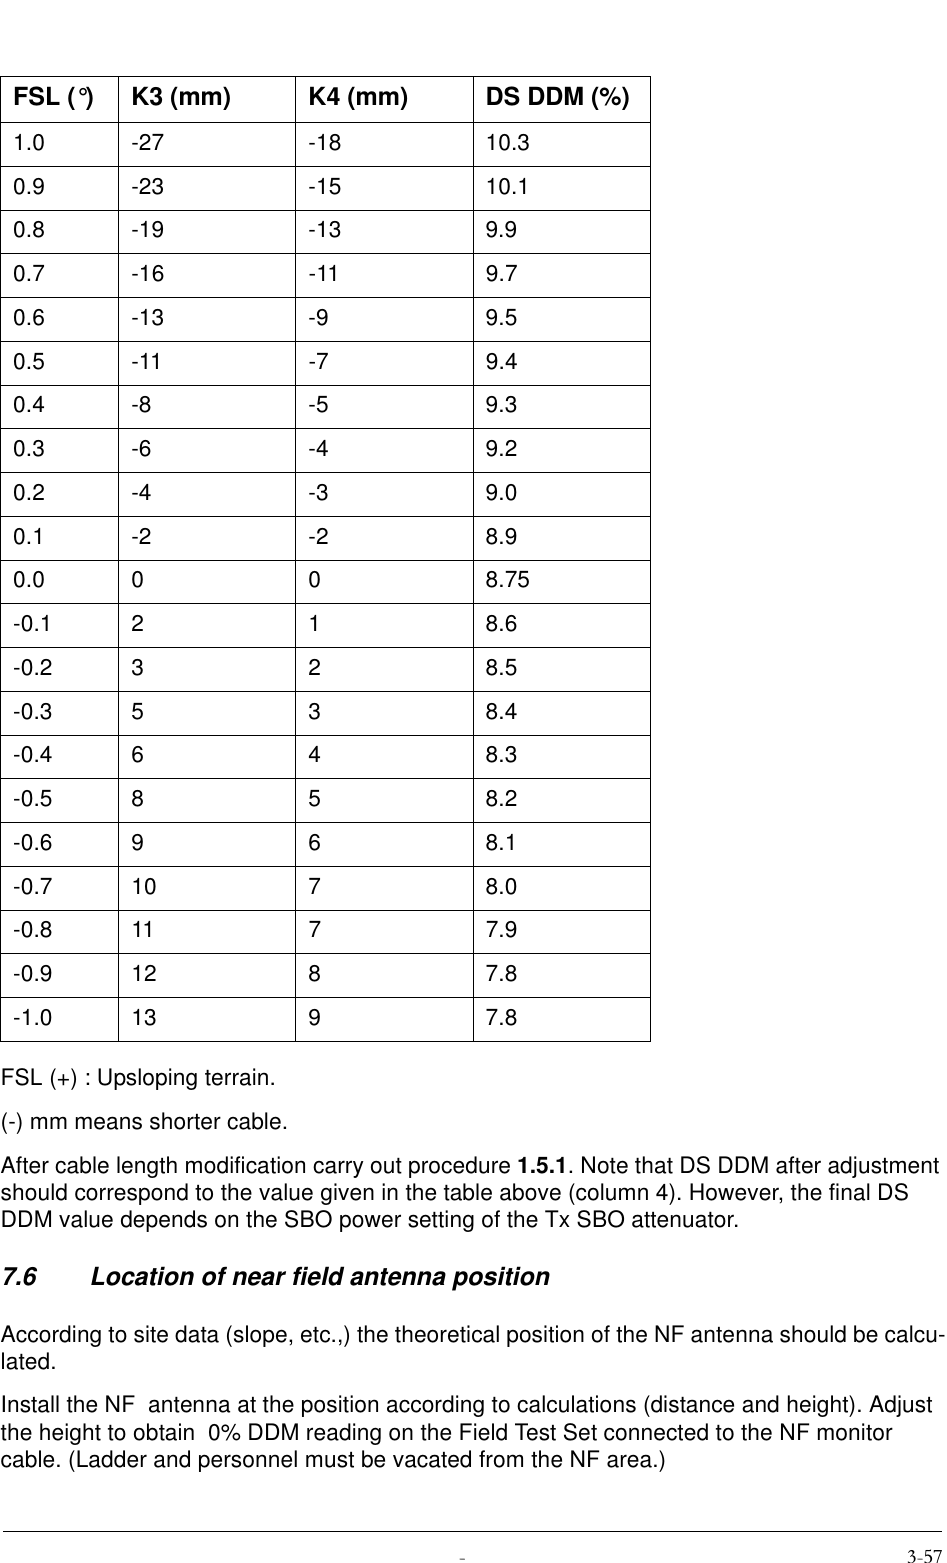  FSL (+) : Upsloping terrain. (-) mm means shorter cable.After cable length modification carry out procedure 1.5.1. Note that DS DDM after adjustment should correspond to the value given in the table above (column 4). However, the final DS DDM value depends on the SBO power setting of the Tx SBO attenuator.7.6 Location of near field antenna positionAccording to site data (slope, etc.,) the theoretical position of the NF antenna should be calcu-lated.Install the NF  antenna at the position according to calculations (distance and height). Adjust the height to obtain  0% DDM reading on the Field Test Set connected to the NF monitor cable. (Ladder and personnel must be vacated from the NF area.) FSL (°)  K3 (mm) K4 (mm) DS DDM (%)1.0 -27 -18 10.30.9 -23 -15 10.10.8 -19 -13 9.90.7 -16 -11 9.70.6 -13 -9 9.50.5 -11 -7 9.40.4-8-59.30.3-6-49.20.2-4-39.00.1-2-28.90.0 0 0 8.75-0.1 2 1 8.6-0.2 3 2 8.5-0.3 5 3 8.4-0.4 6 4 8.3-0.5 8 5 8.2-0.6 9 6 8.1-0.7 10 7 8.0-0.8 11 7 7.9-0.9 12 8 7.8-1.0 13 9 7.8